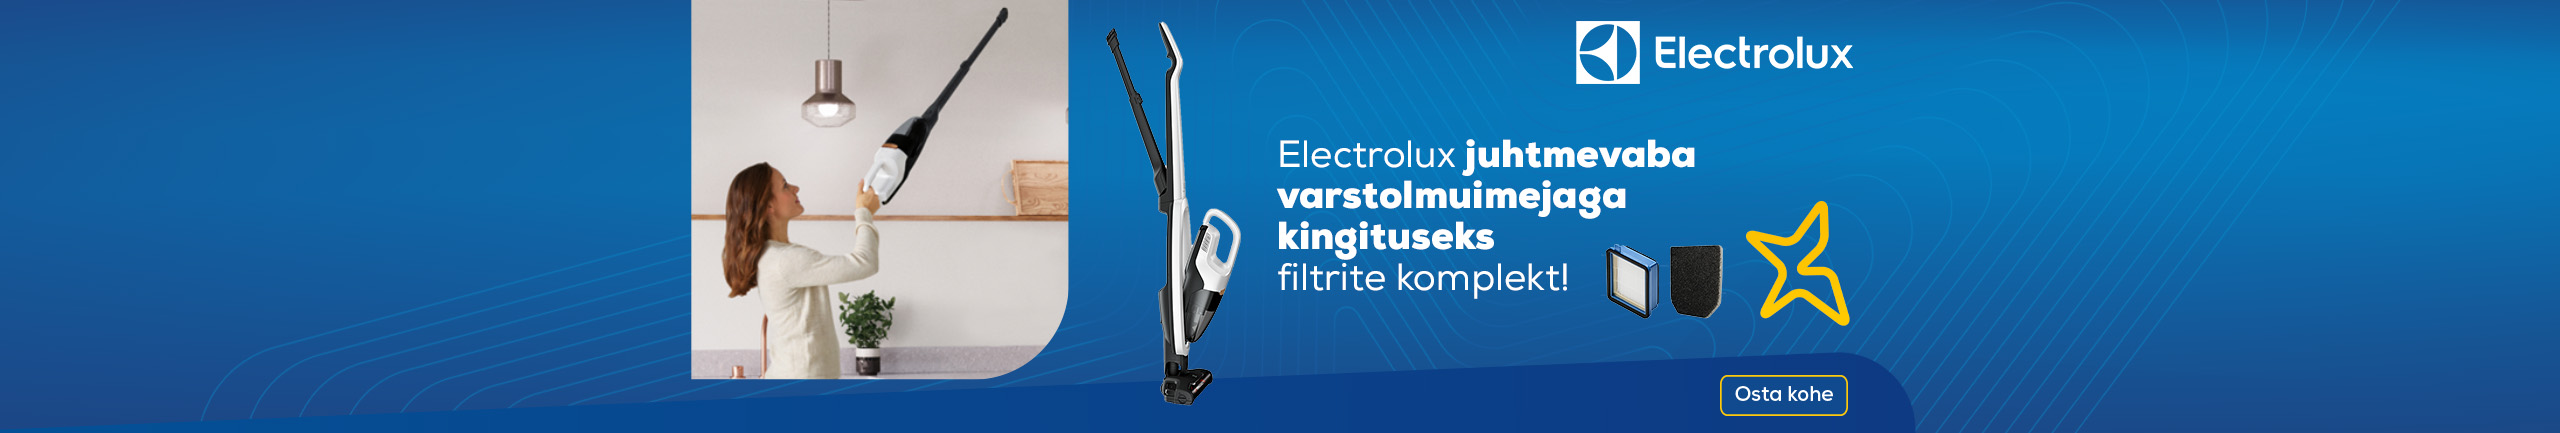 Buy Electrolux vacuum stick and receive a complimentary gift!